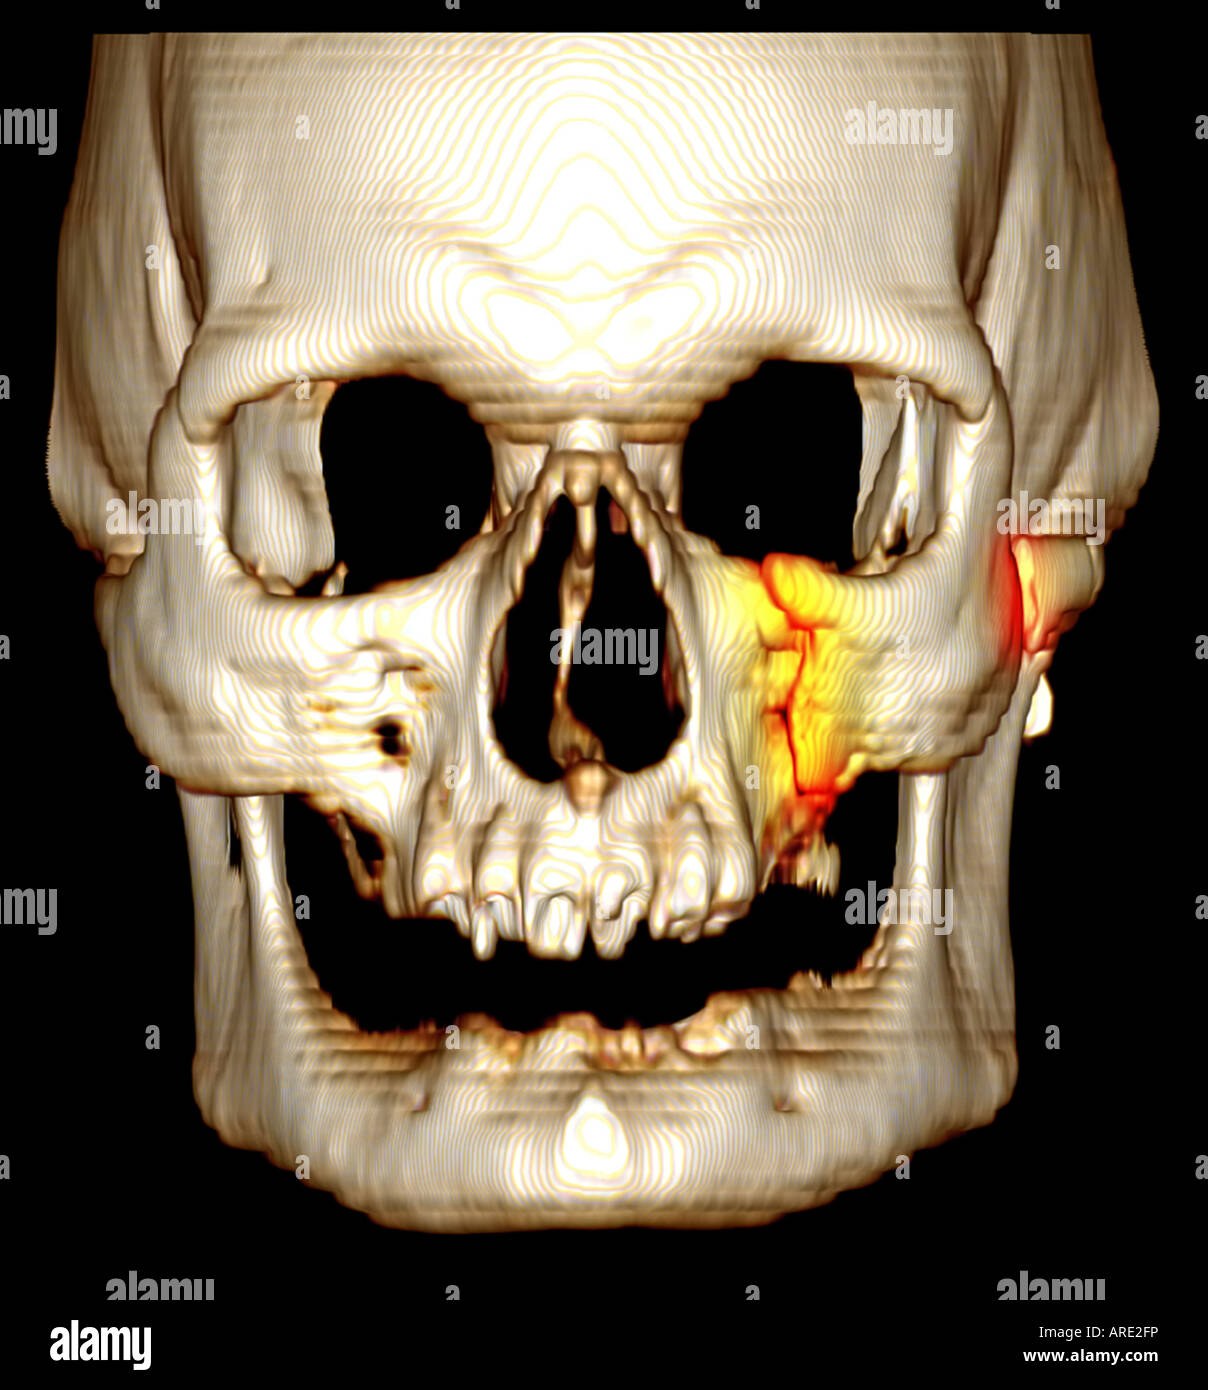 treatment fracture of zygomatic